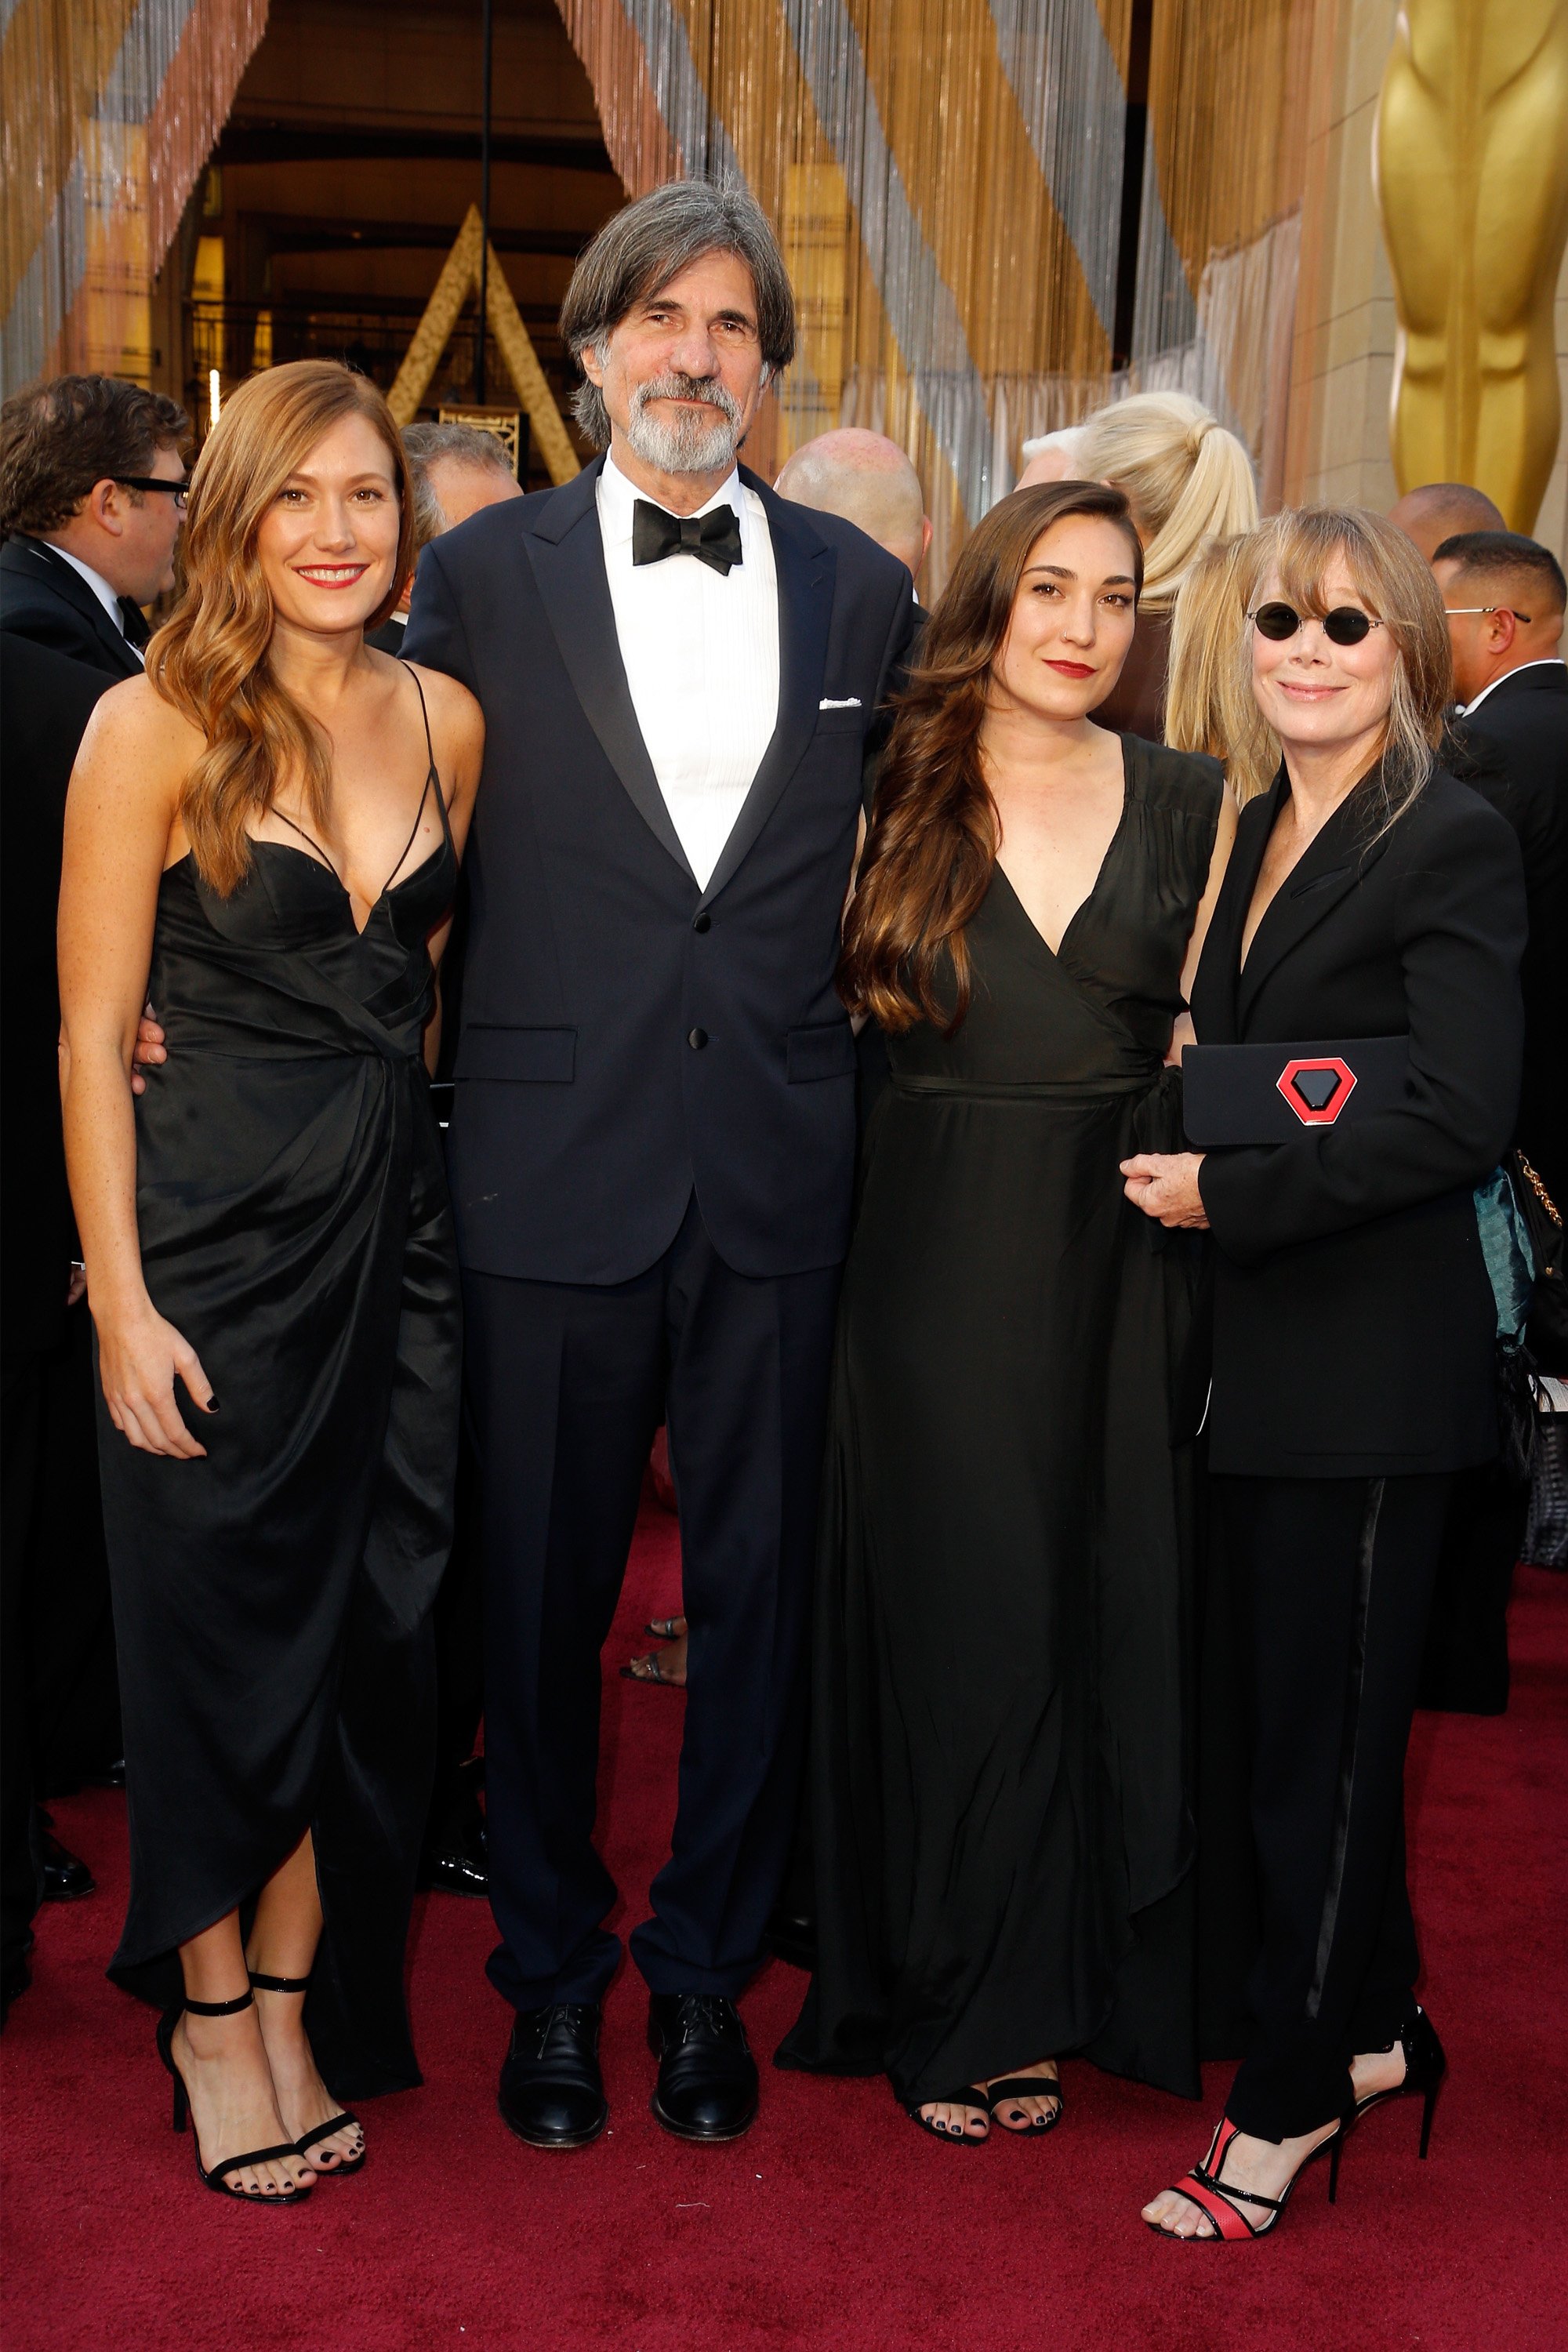 Schuyler Fisk, Jack Fisk, Madison Fisk, and Sissy Spacek at the 88th Annual Academy Awards on February 28, 2016, in Hollywood, California | Source: Getty Images